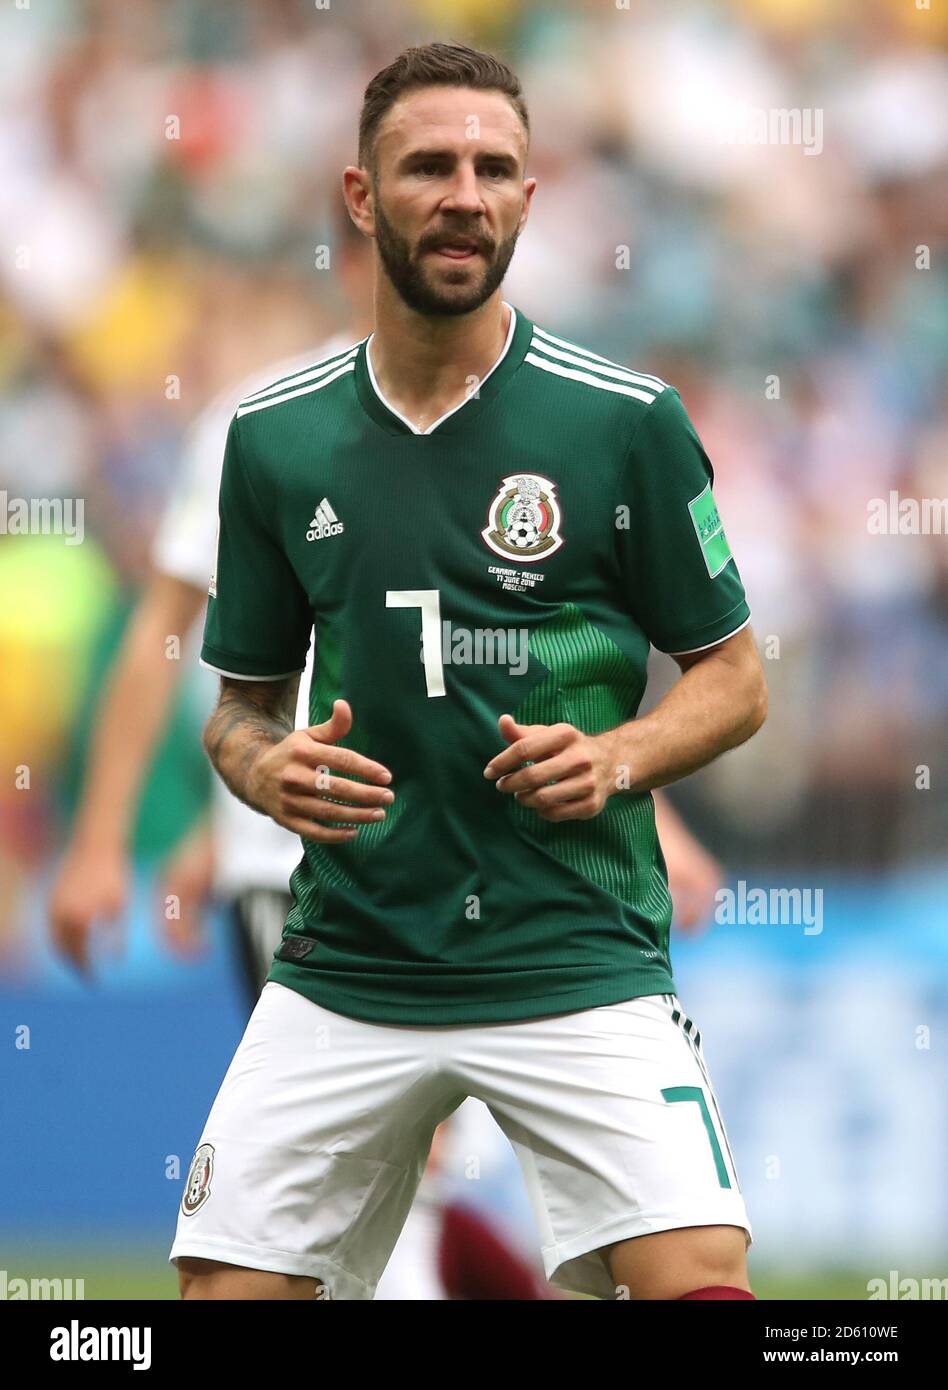 Mexico's Miguel Layun during the game Stock Photo